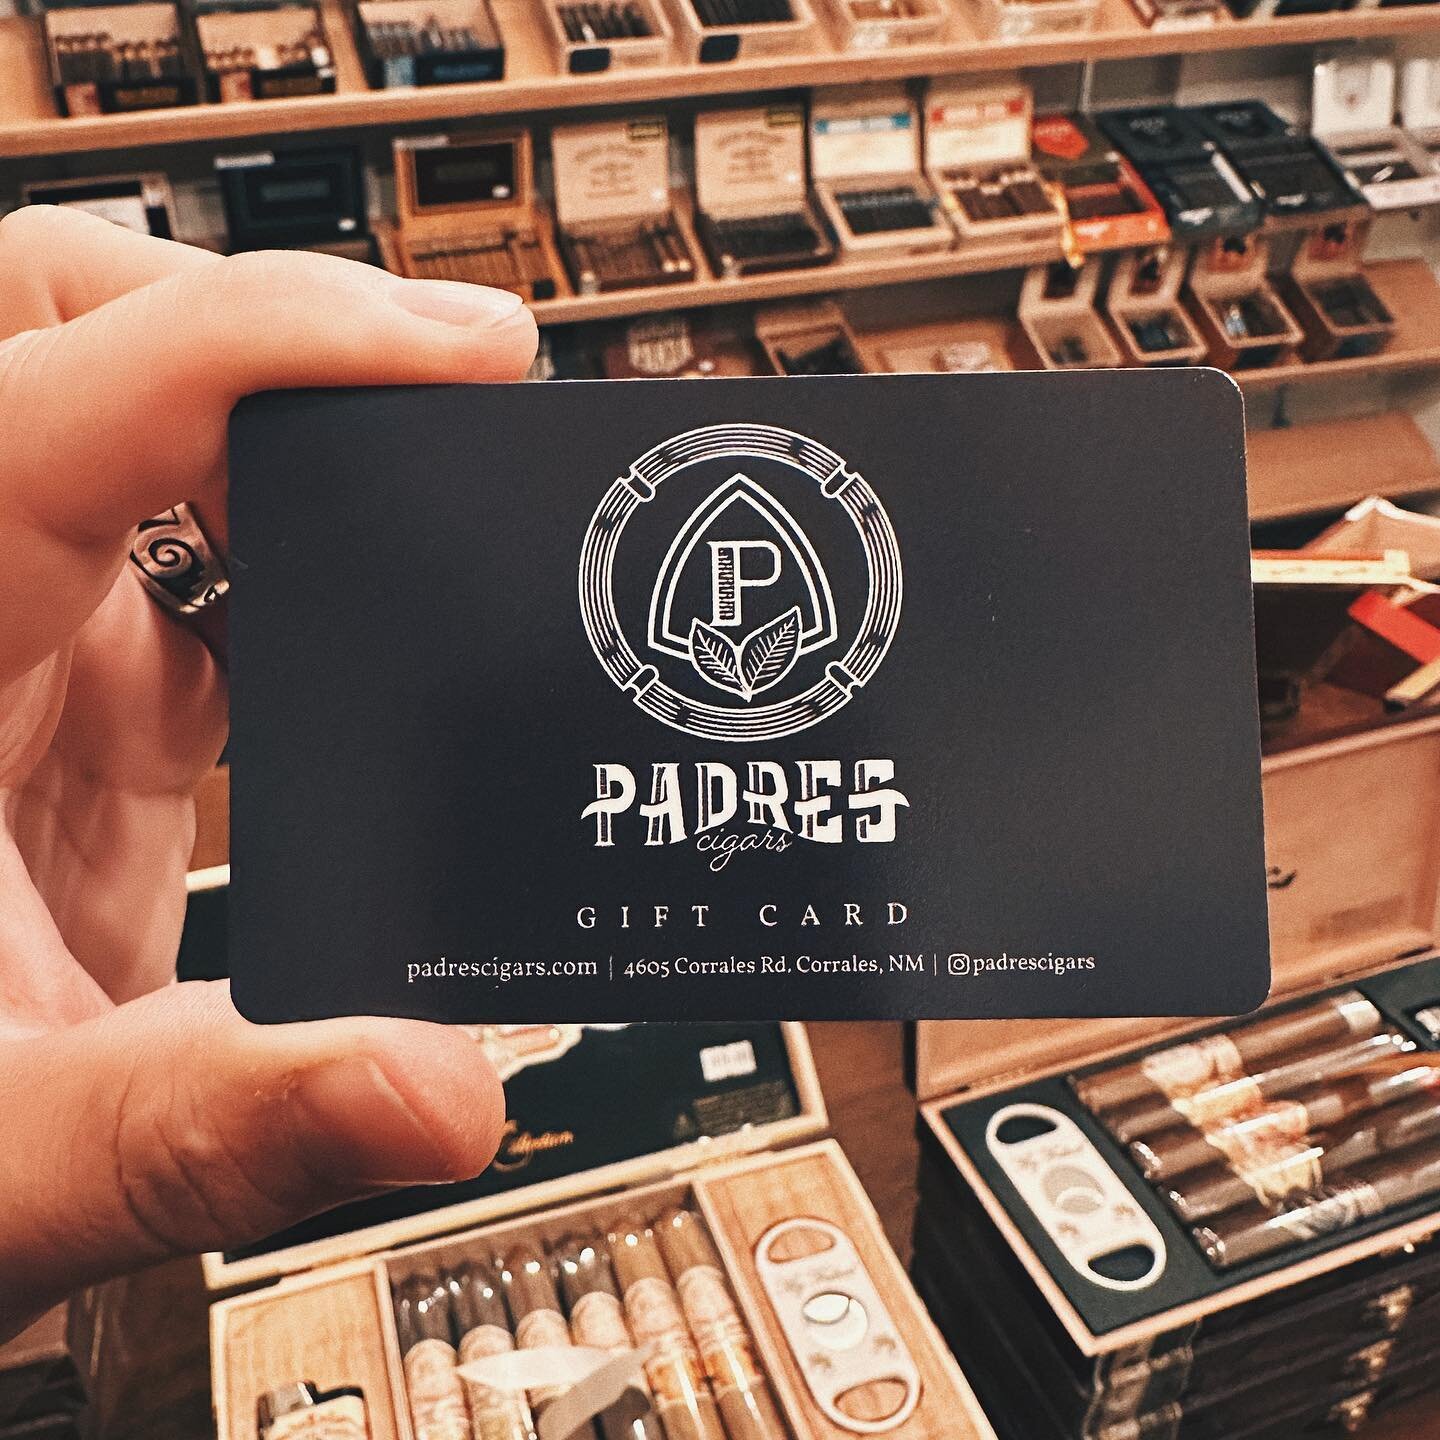 Gift Cards now available at Padres!